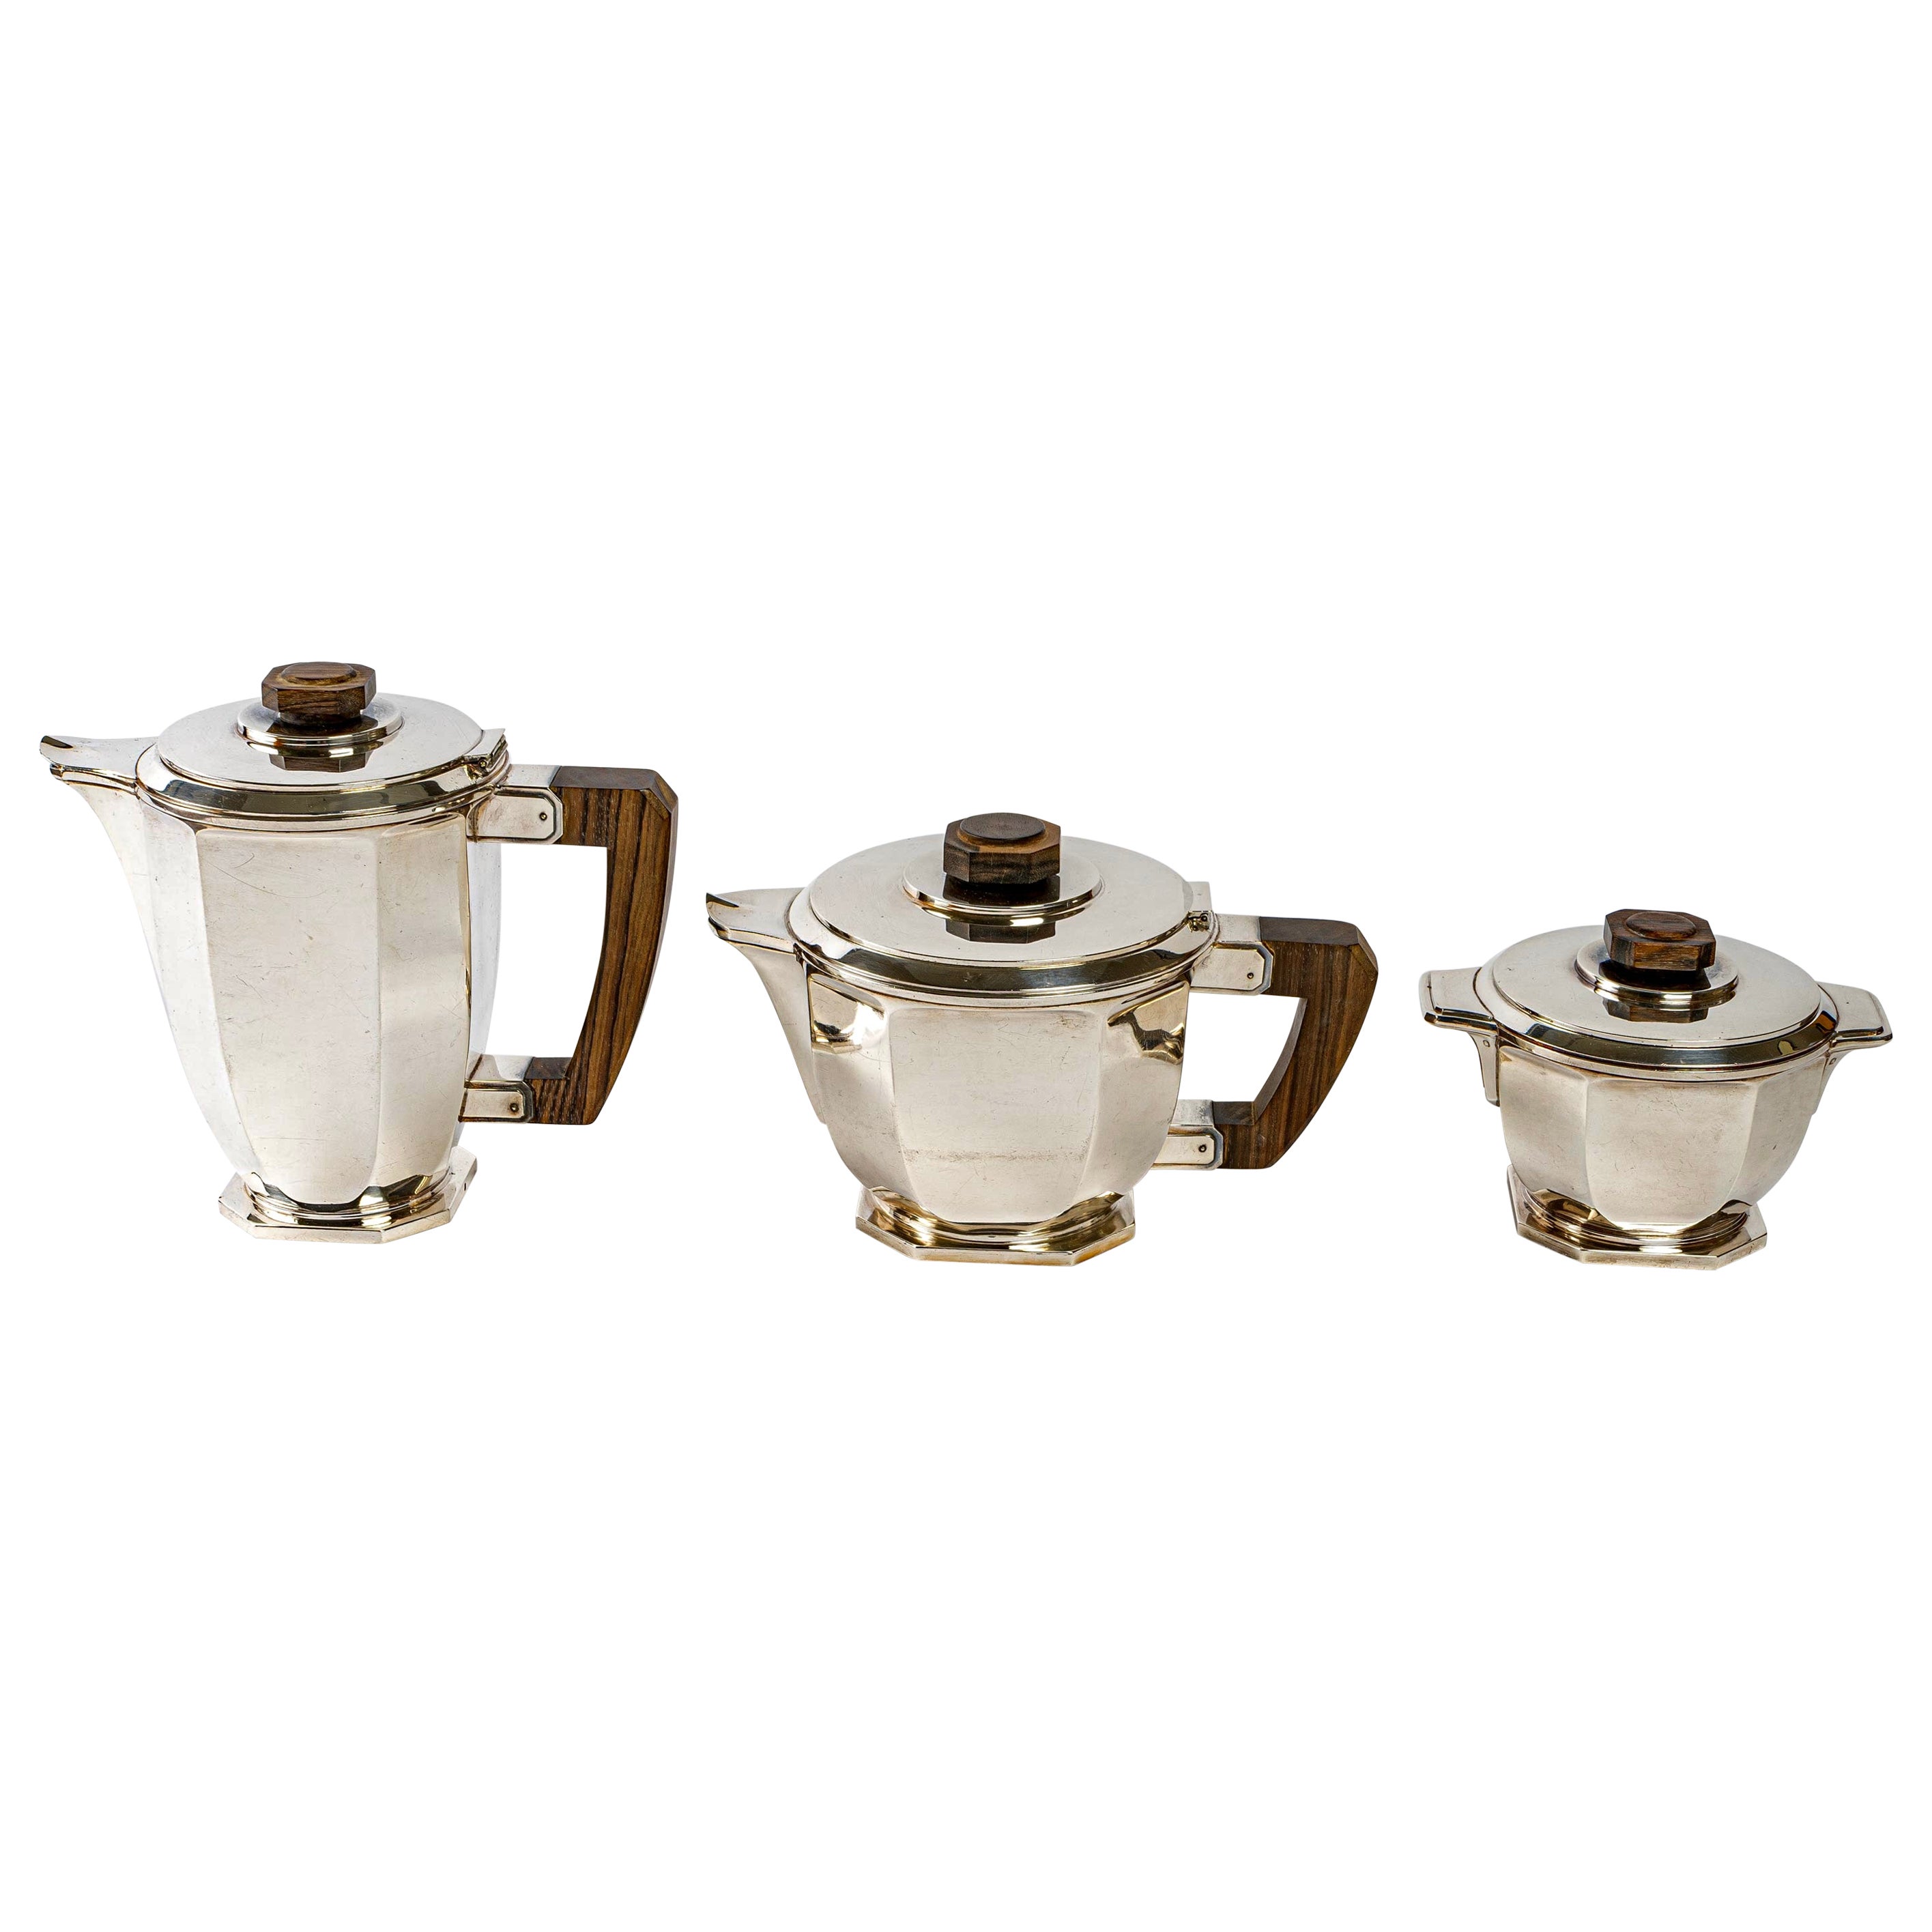 1930 Ernest Prost, Tea and Coffee Service in Sterling Silver and Macassar